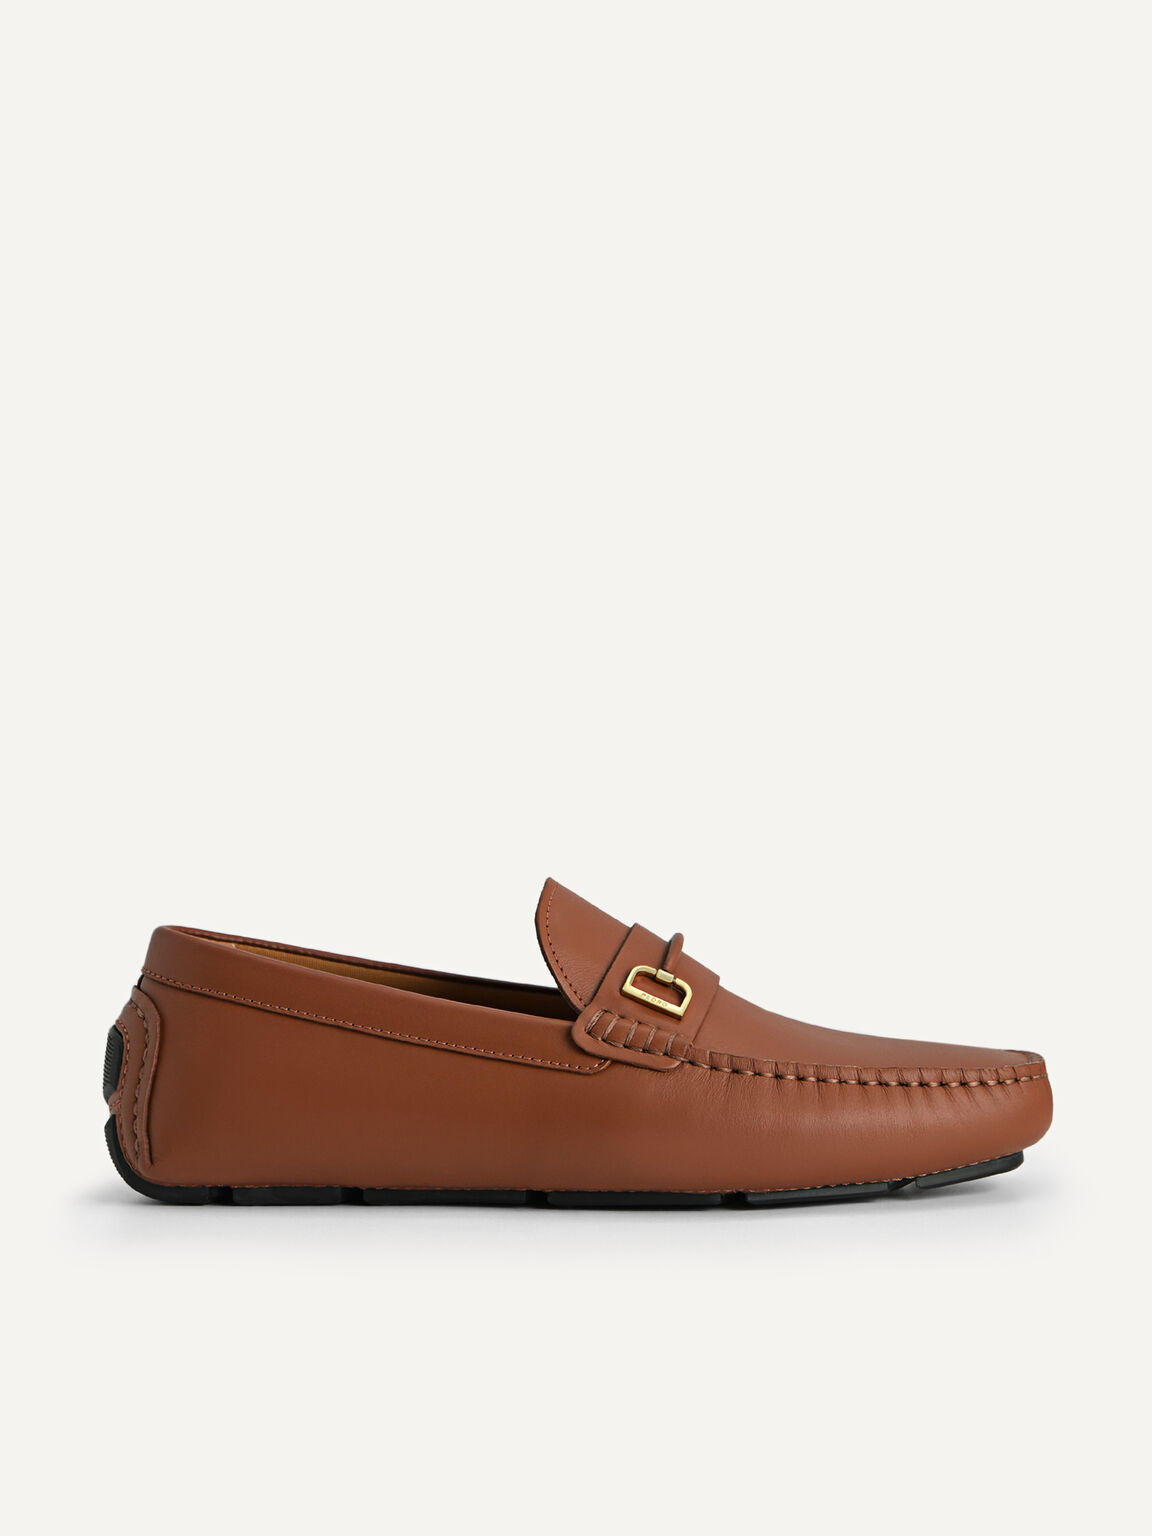 Leather Moccasins with Metal Bit, Cognac